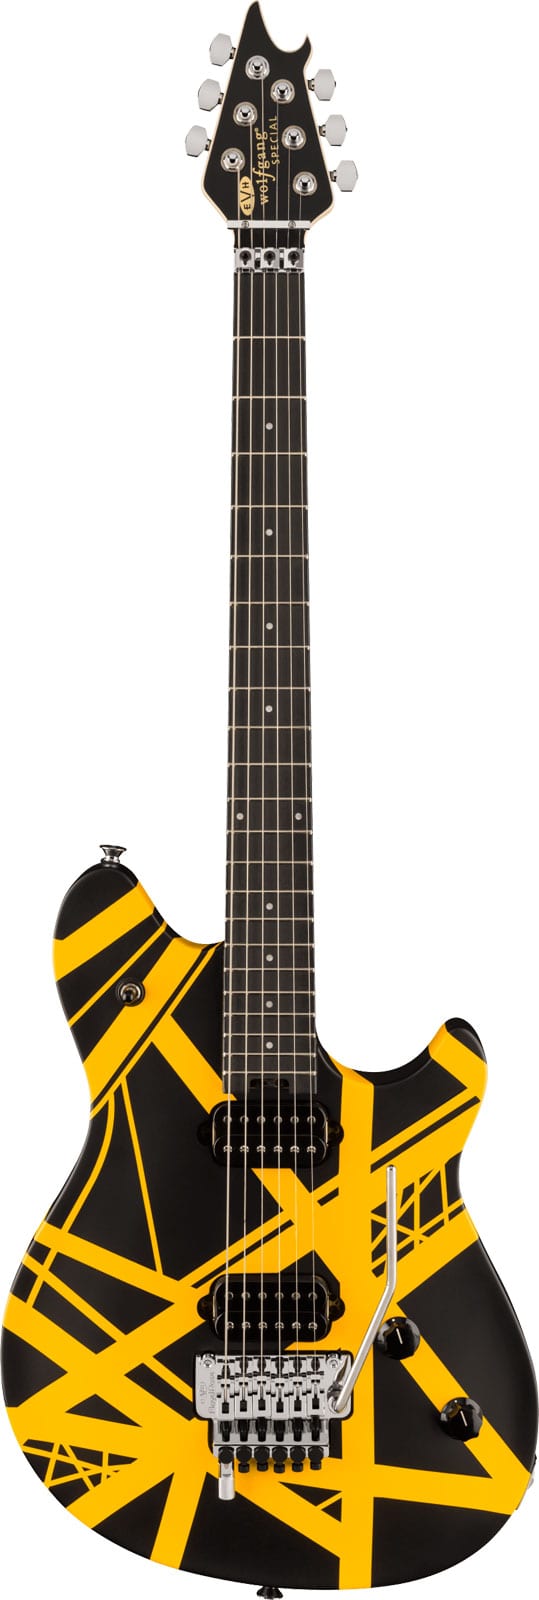 EVH WOLFGANG SPECIAL STRIPED SERIES, EBONY FINGERBOARD, BLACK AND YELLOW